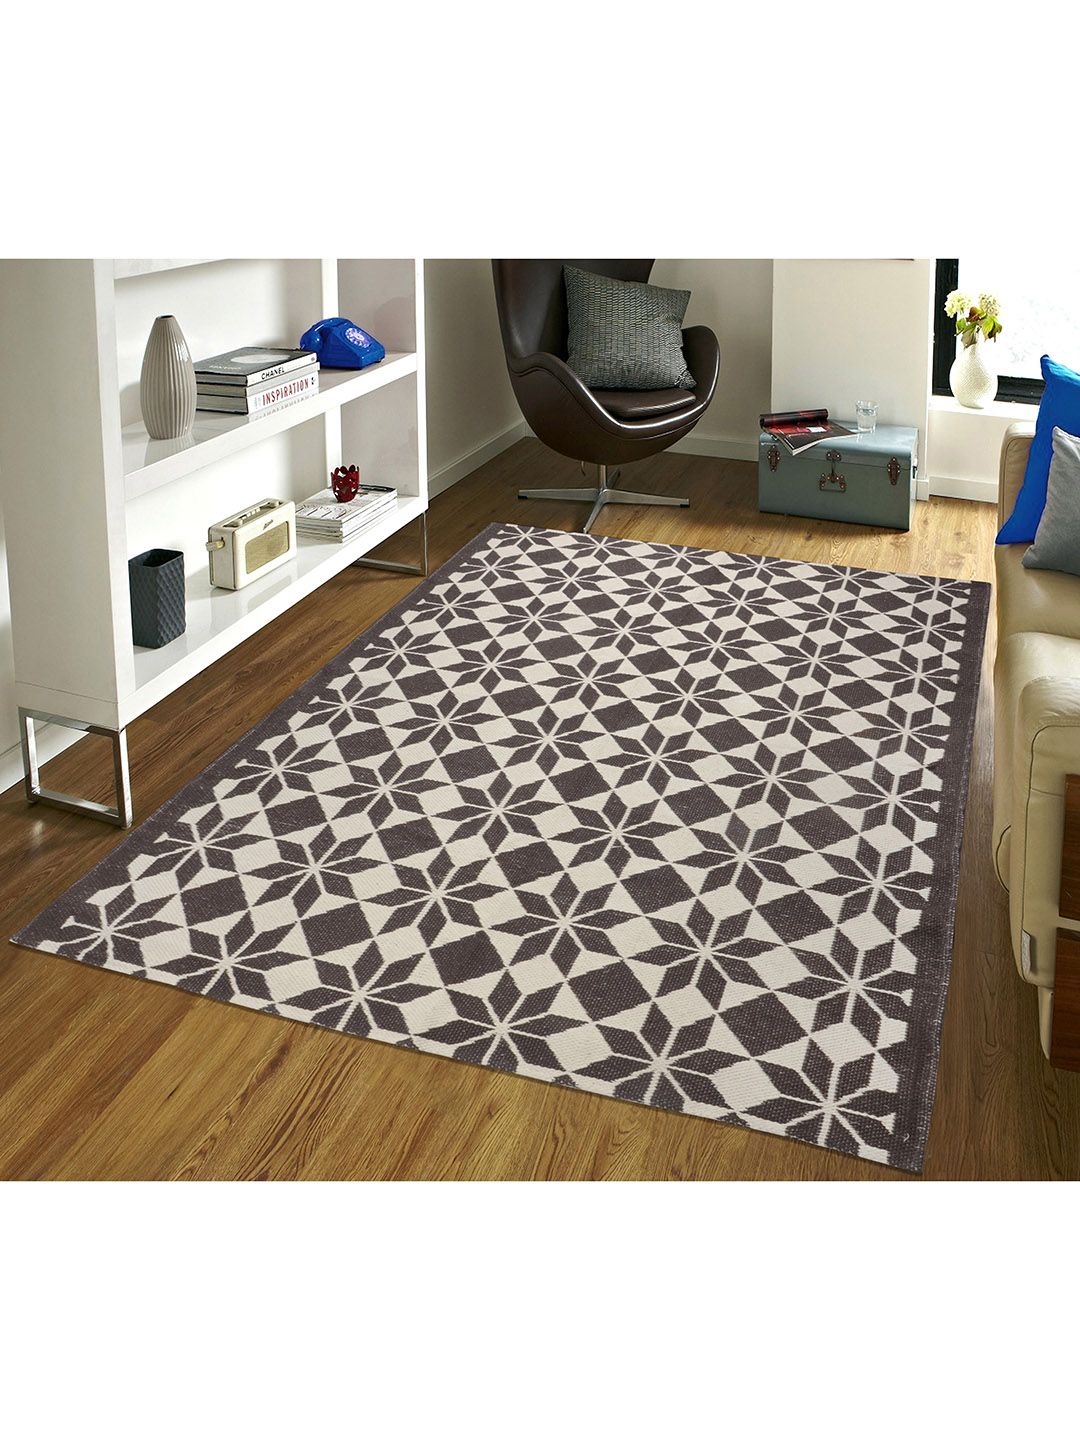 Saral Home Brown & White Printed Cotton Floor Mat Price in India